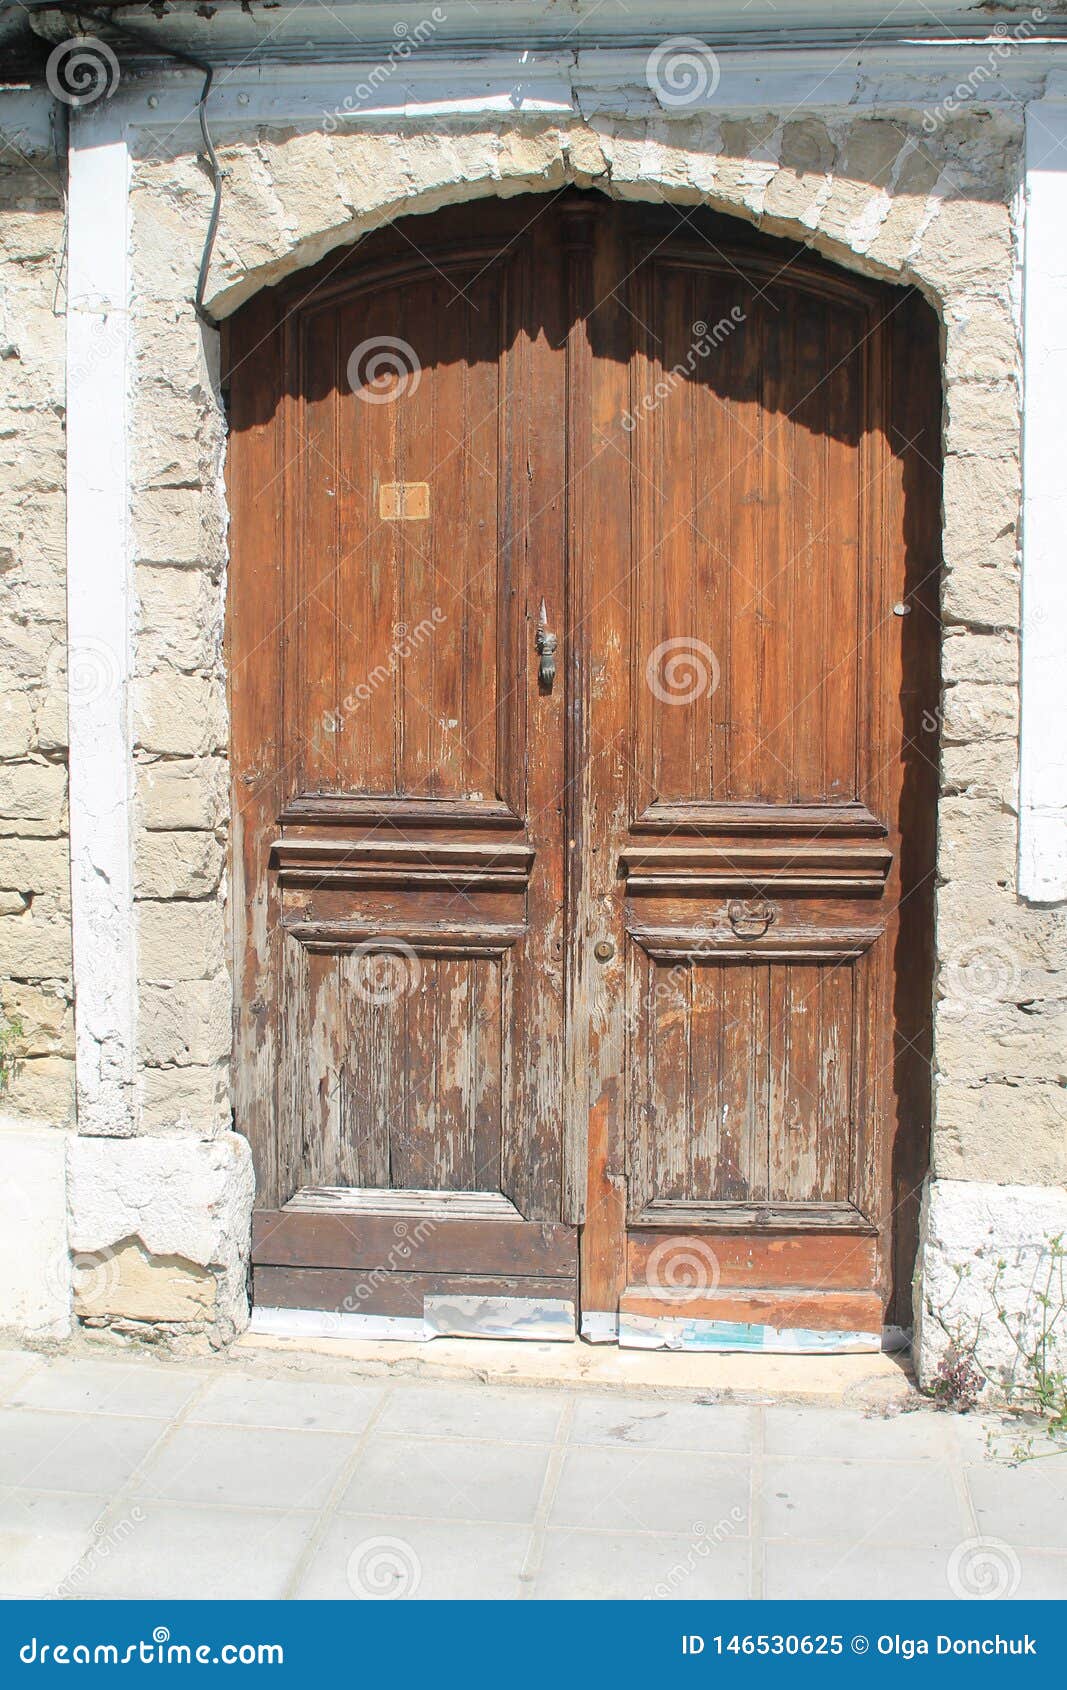 Vintage Wooden Front Door in Stone Wall Stock Image - Image of style ...